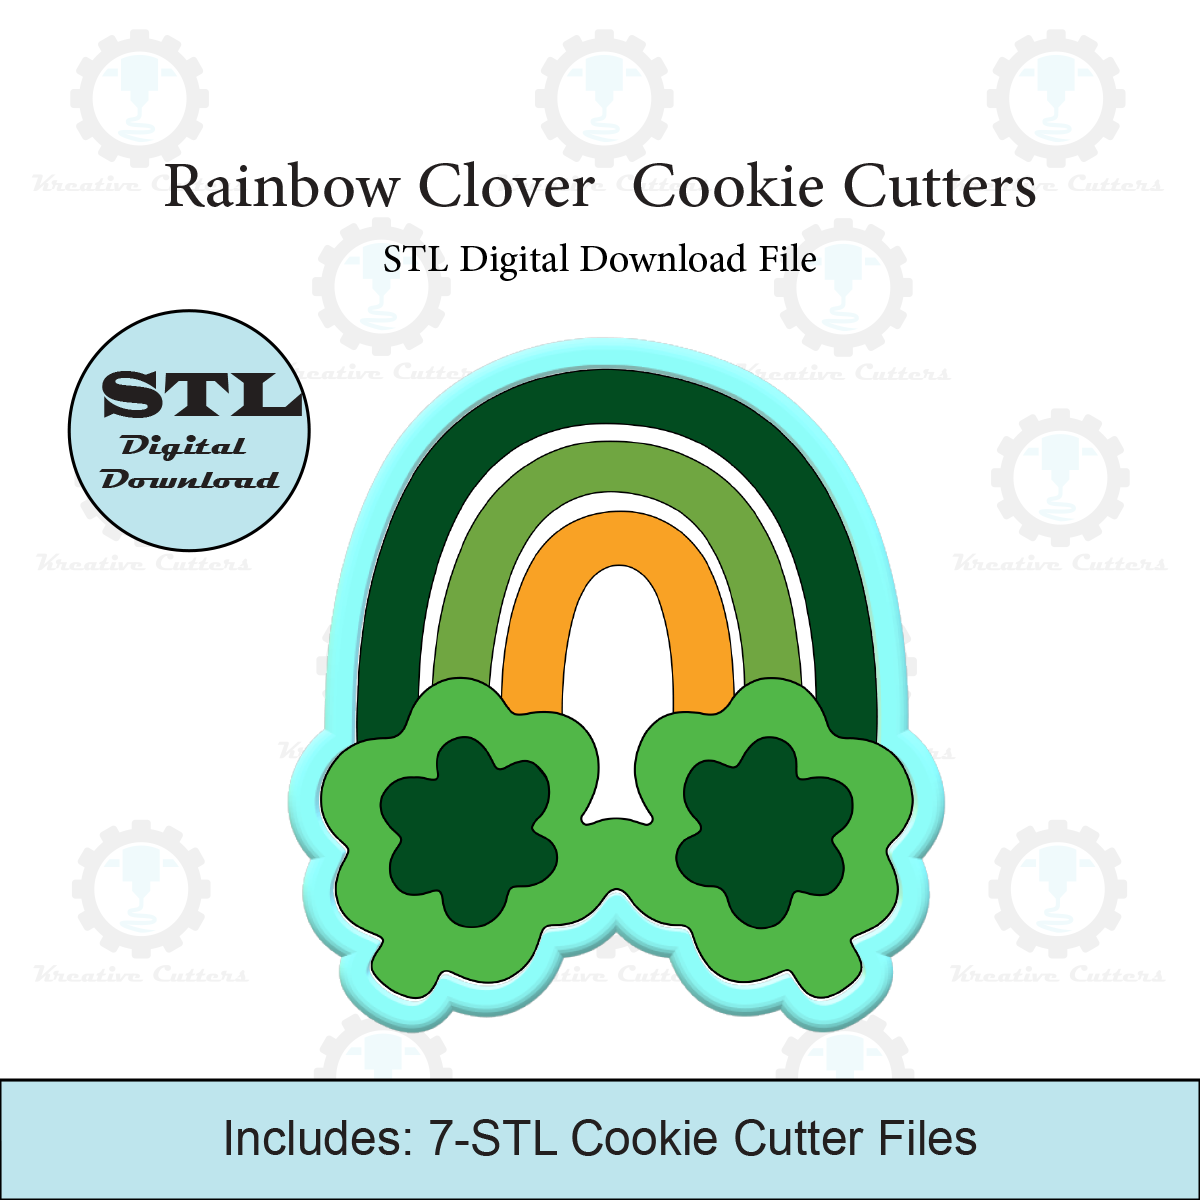 Rainbow Clover Sunglasses Cookie Cutters | STL Files